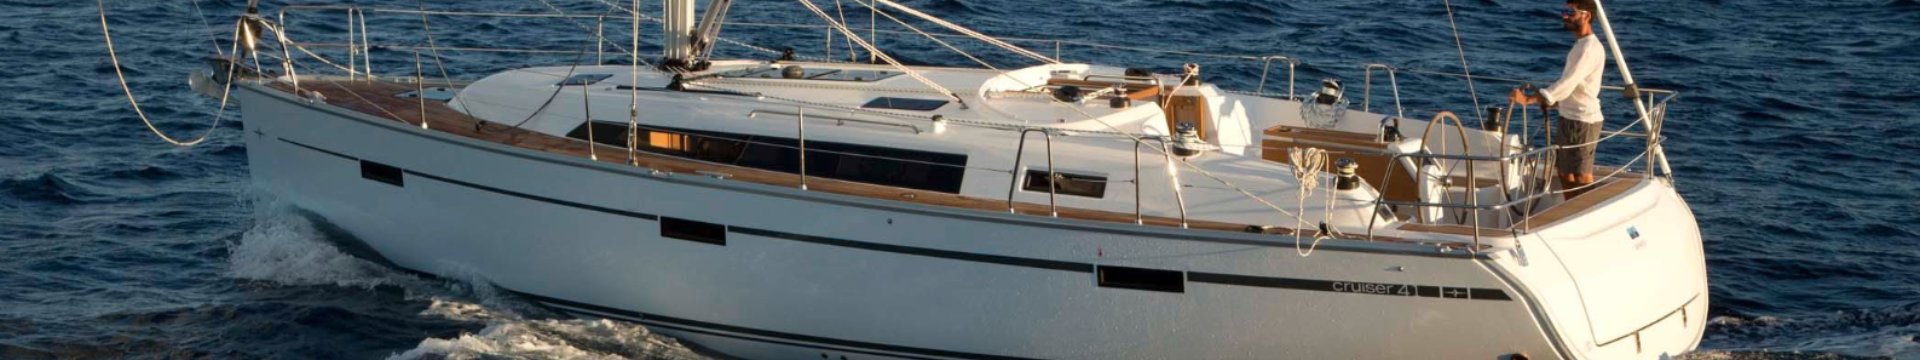 Bavaria Cruiser 41 Lory Main picture for the desktop